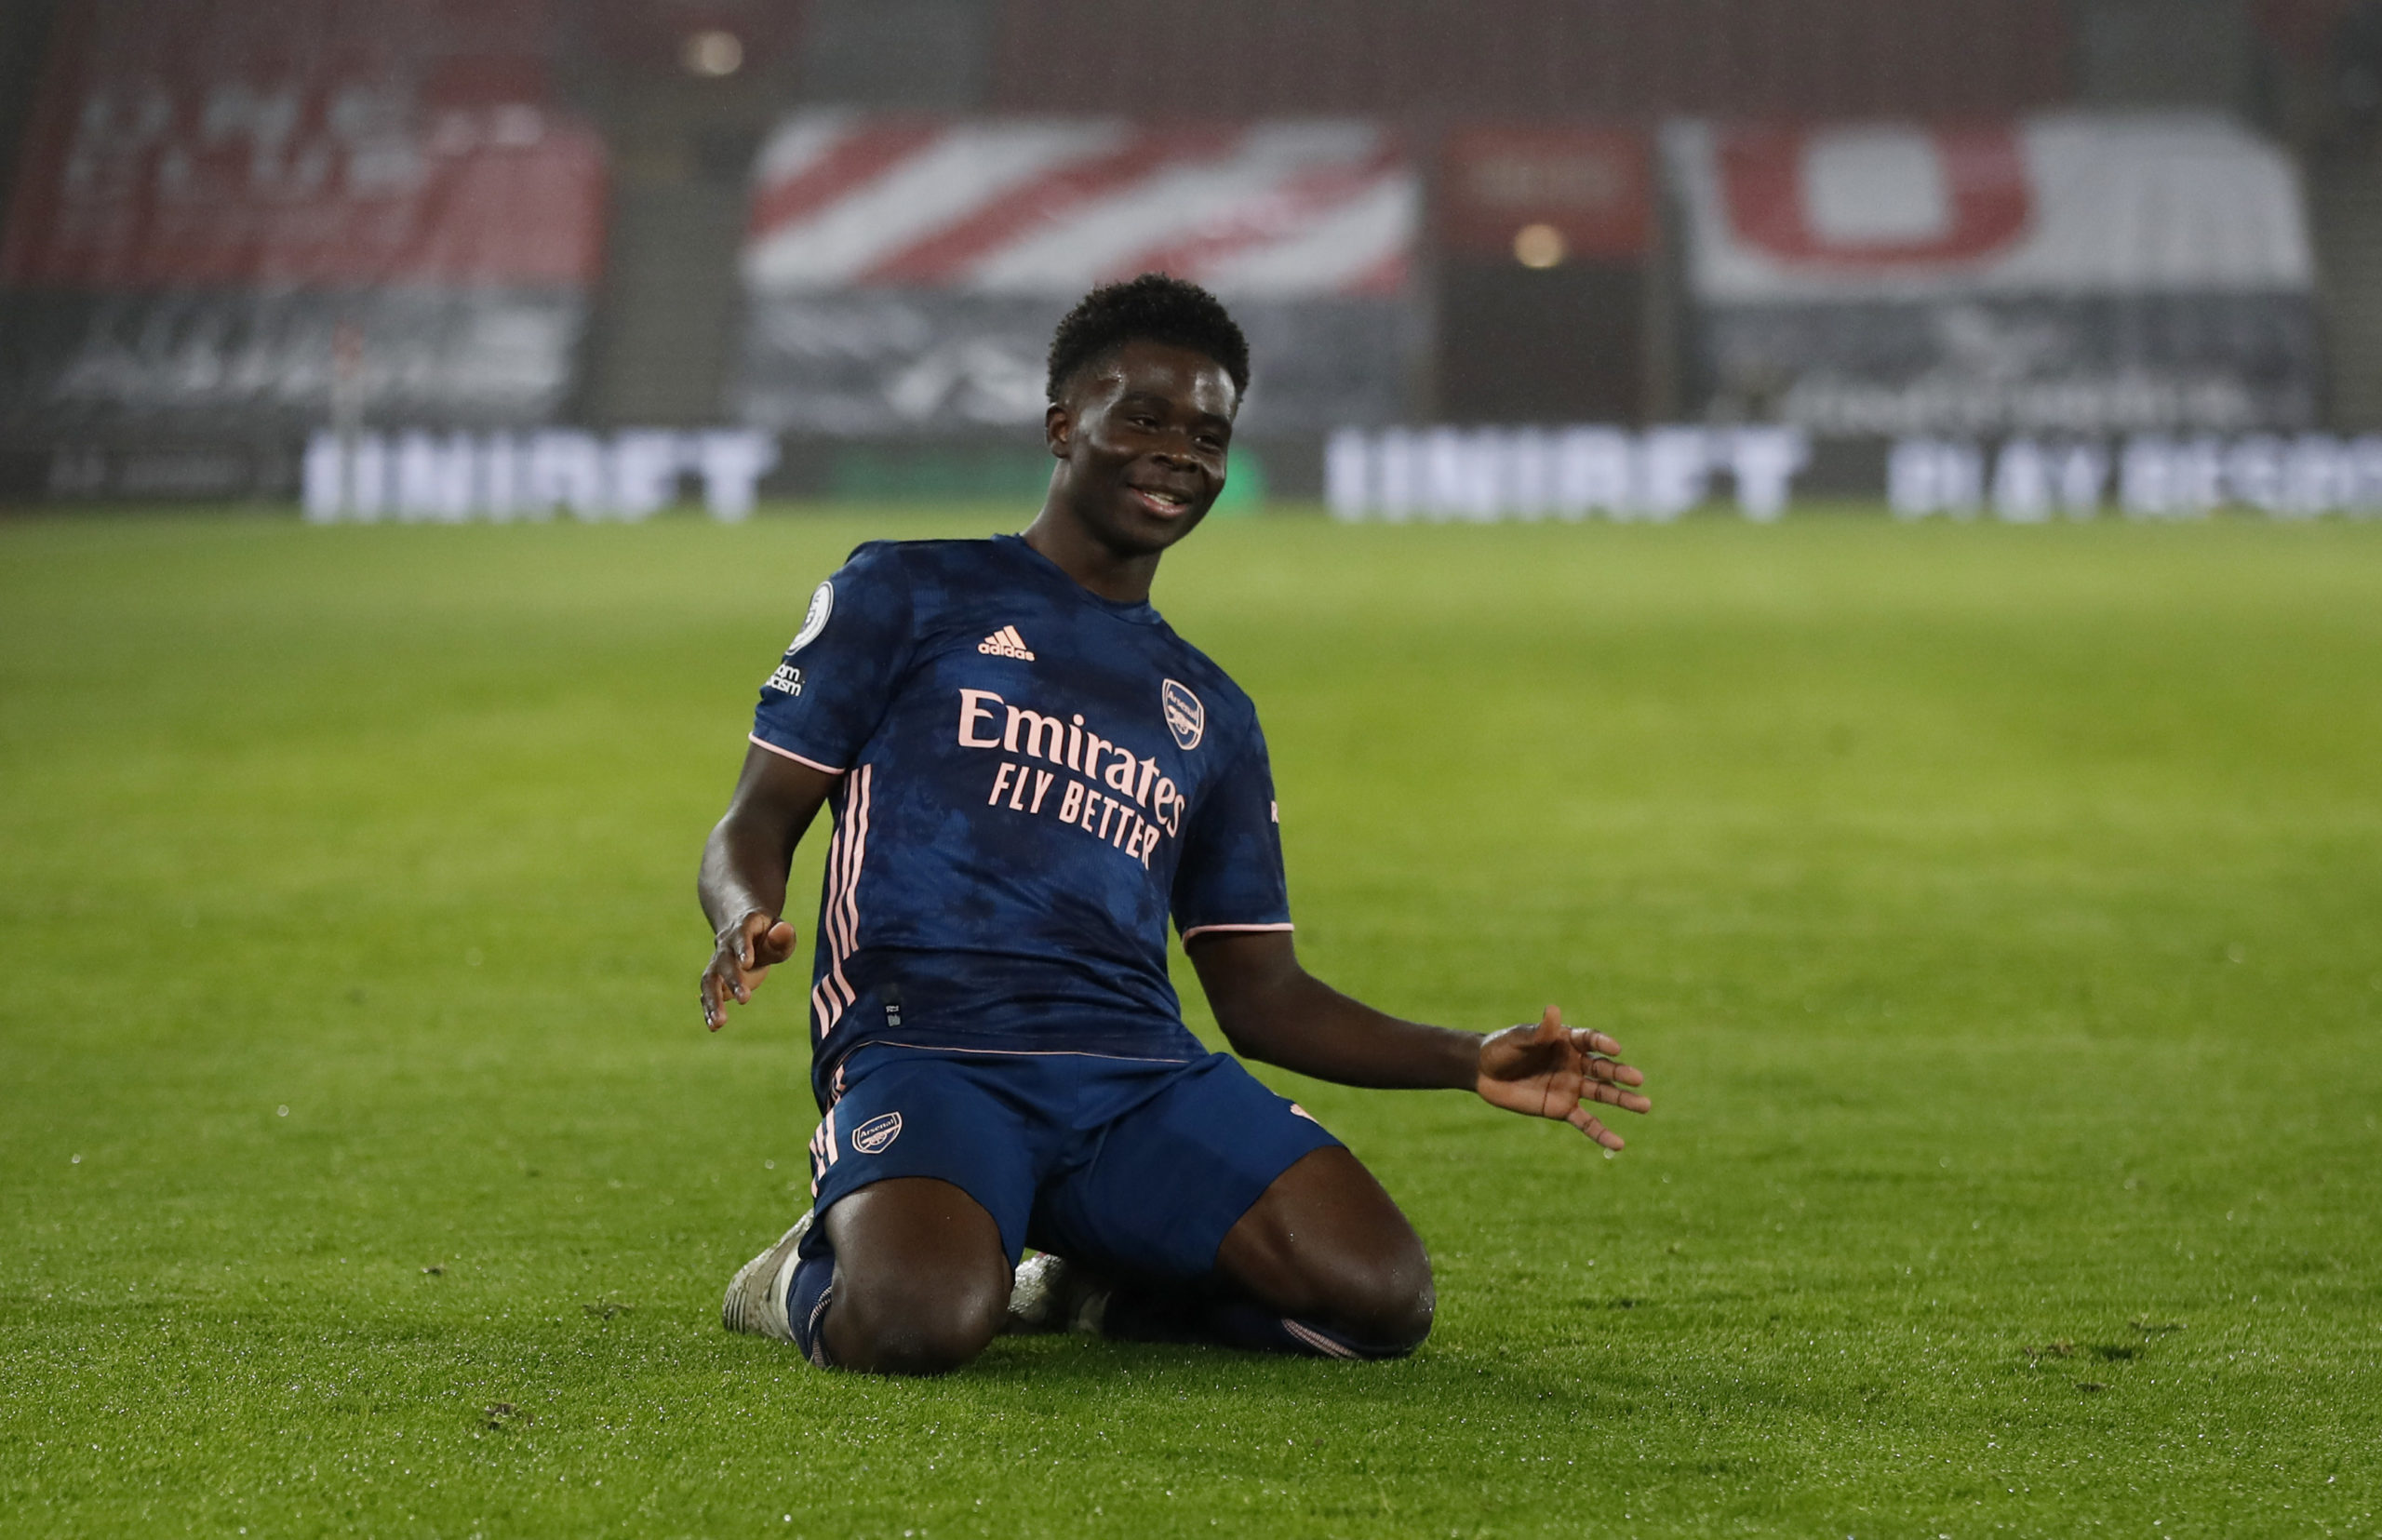 Five amazing Arsenal stats from last night's win including remarkable Bukayo Saka feat